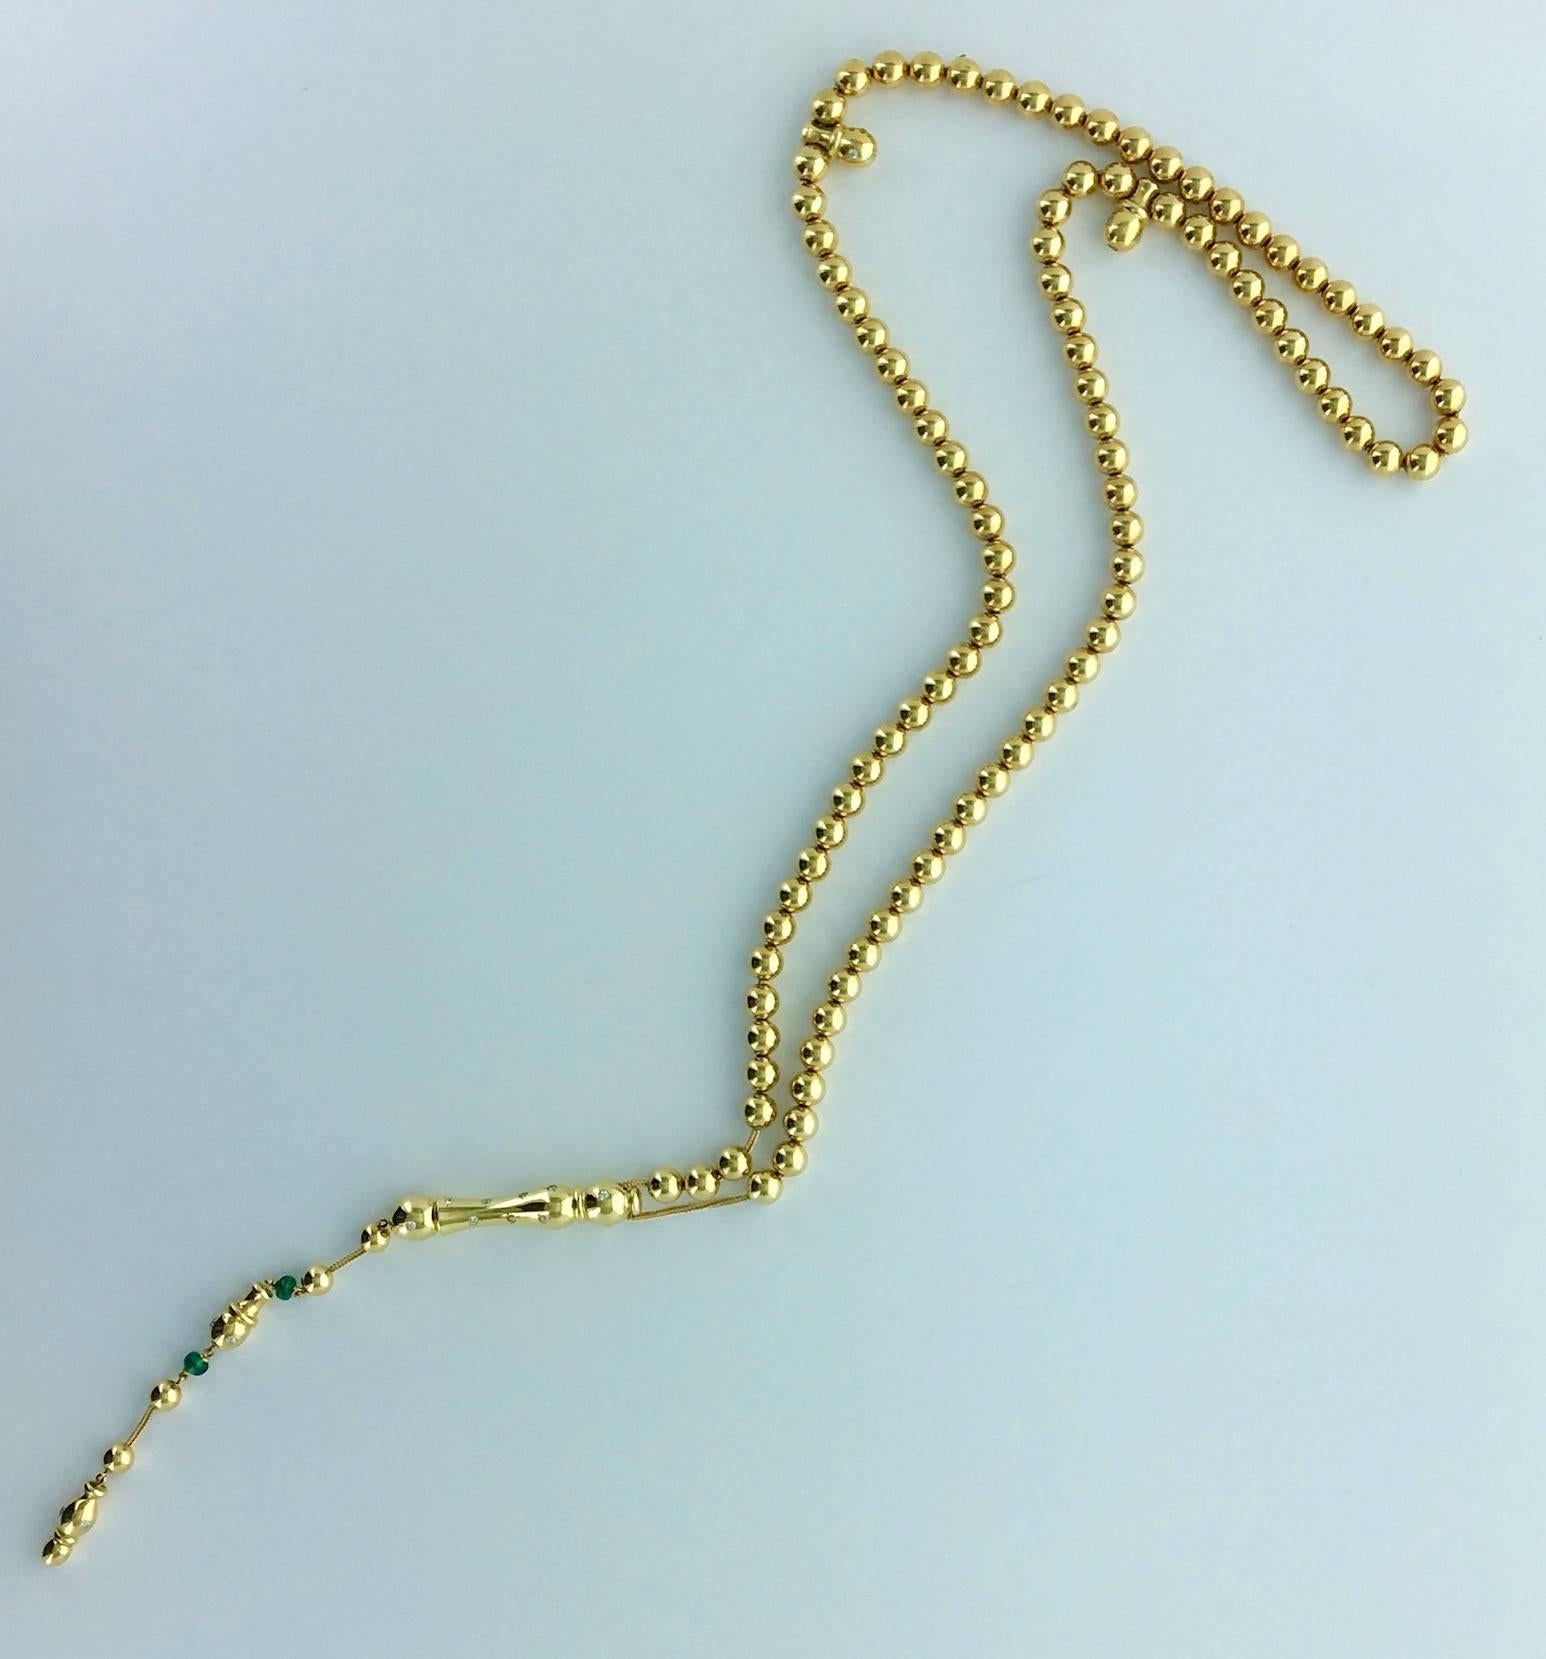 Sautoir Necklace composed by 99 beads in yellow gold, Emerald, White and Fancy Yellow color Diamond.

Circa 1960.